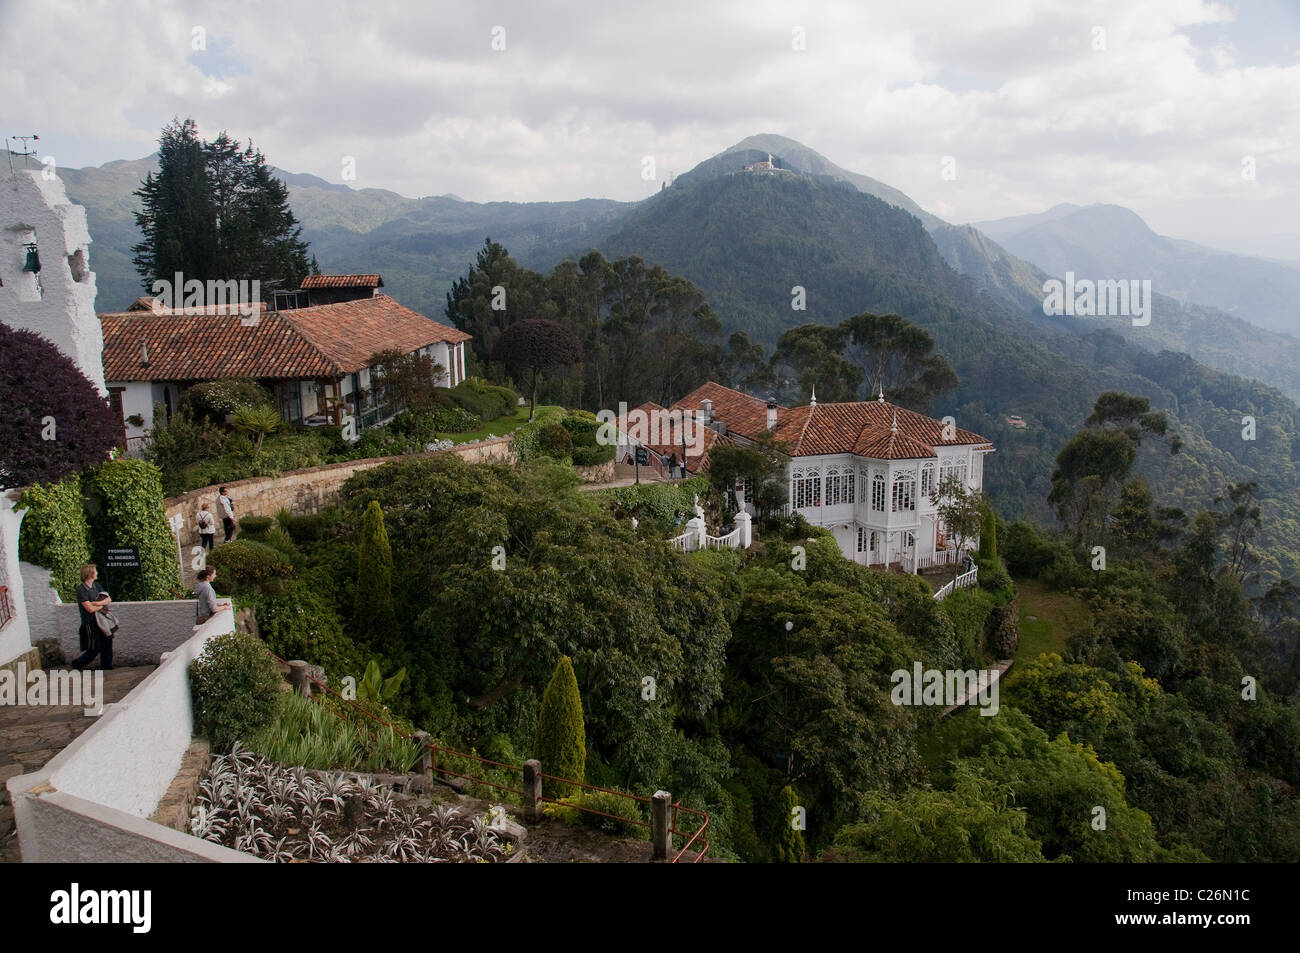 On the hillside above Bogota Colombia is Monserrate, the city's symbol, where two restaurants offer great views and food. Stock Photo